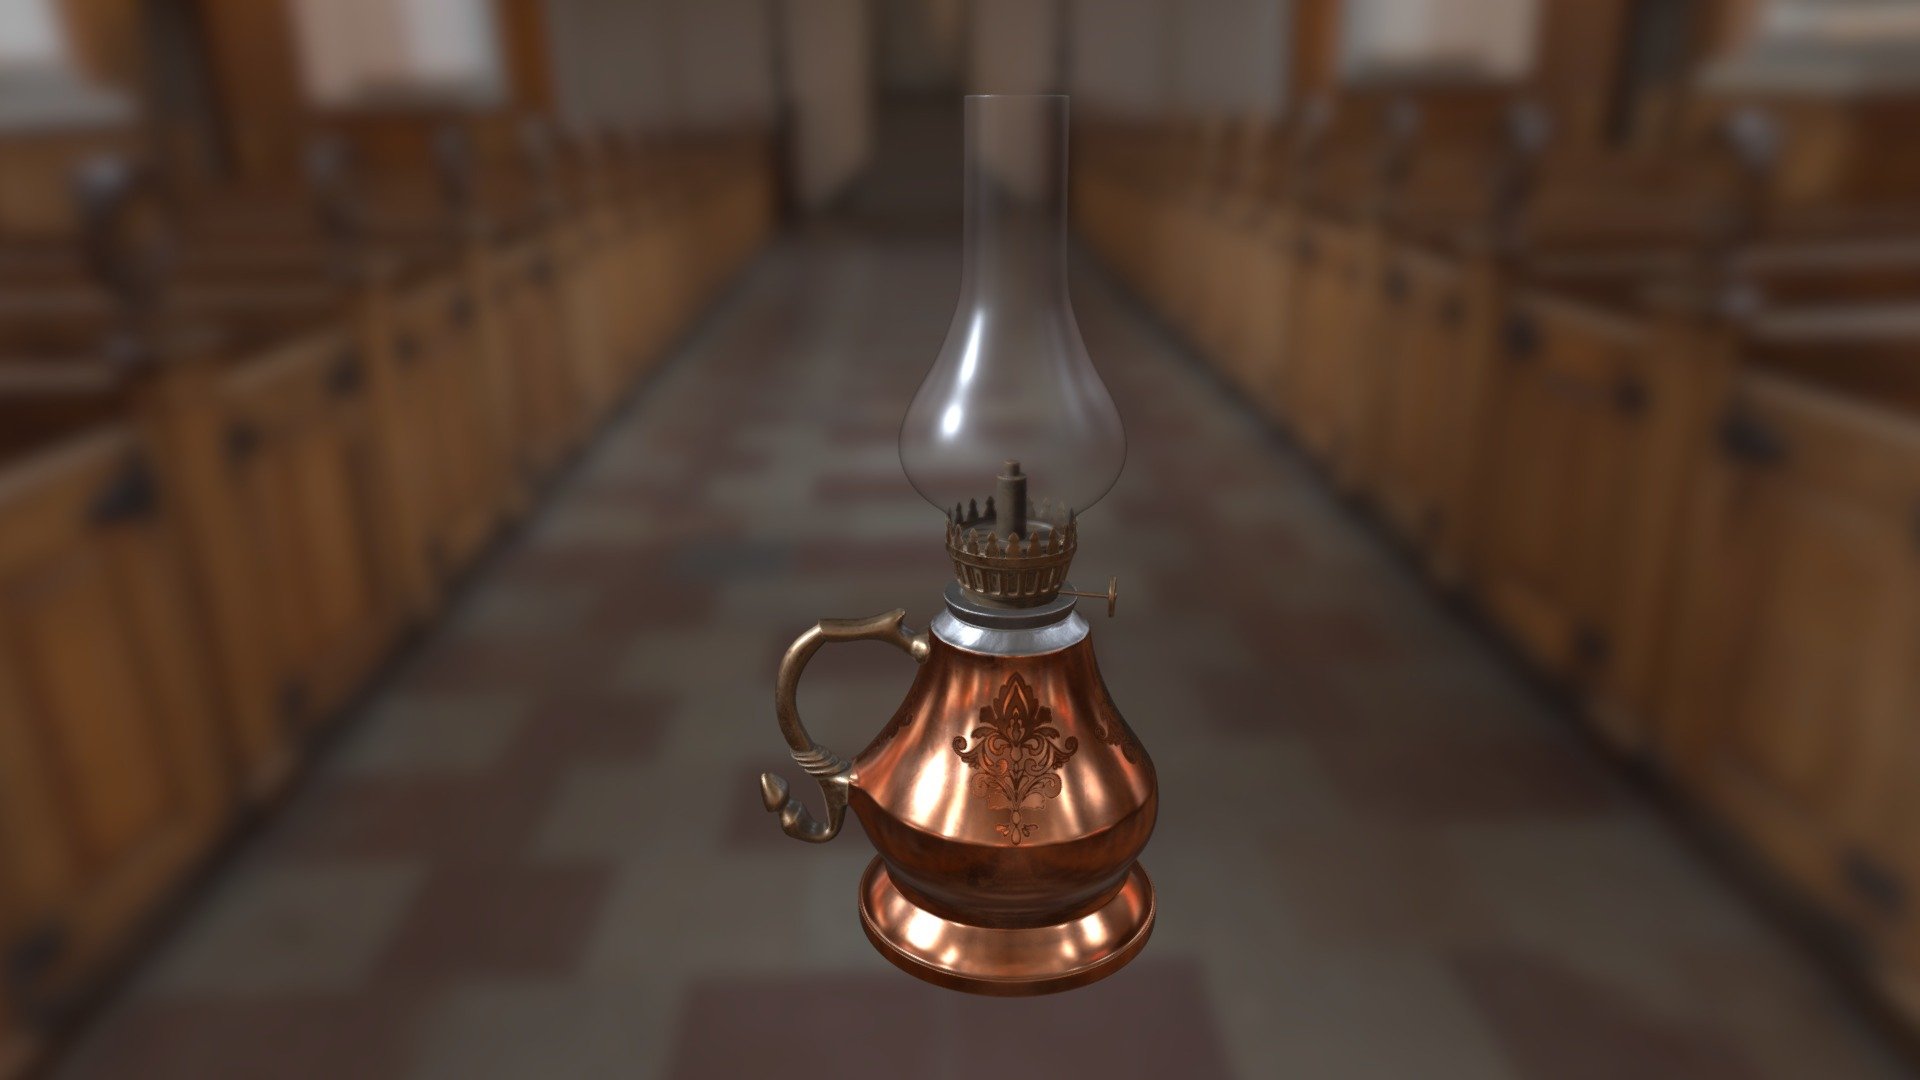 This 3D model is of a 1800's gas lamp, it is based on research of gas lamps from the time period. This asset was created as part of a larger project.

The model was created in Autodesk Maya, with UV mapping also completed in Maya. The model was then exported to Substance Painter to create the texture maps 3d model